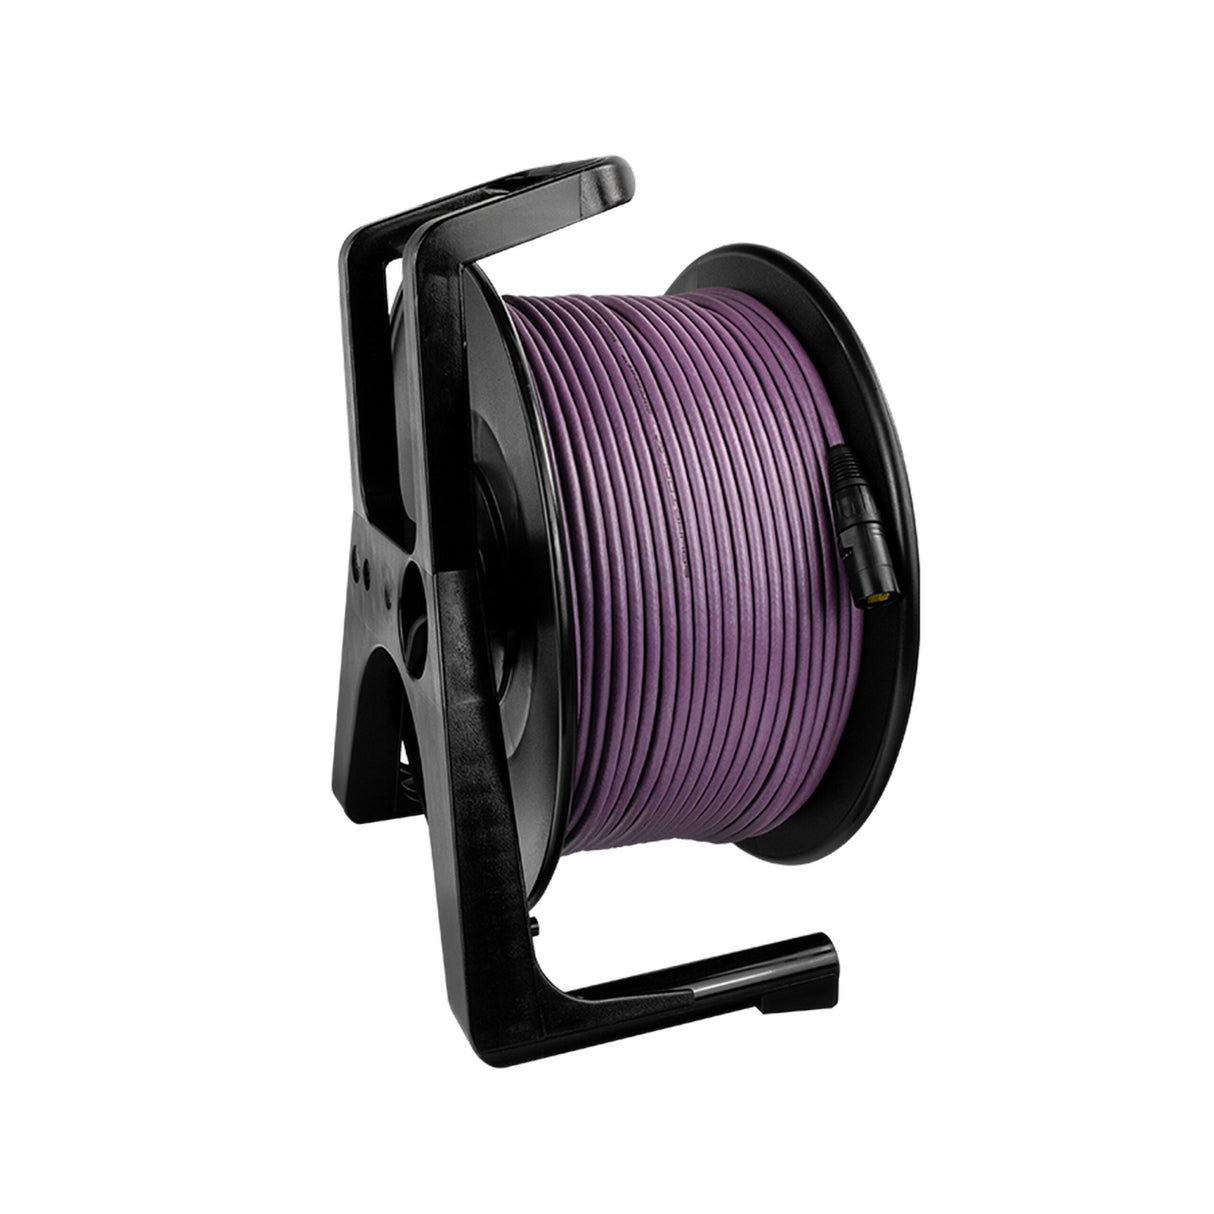 SoundTools SuperCAT etherCON to etherCON CAT5e Cable with Drum, Purple, 100 Meters